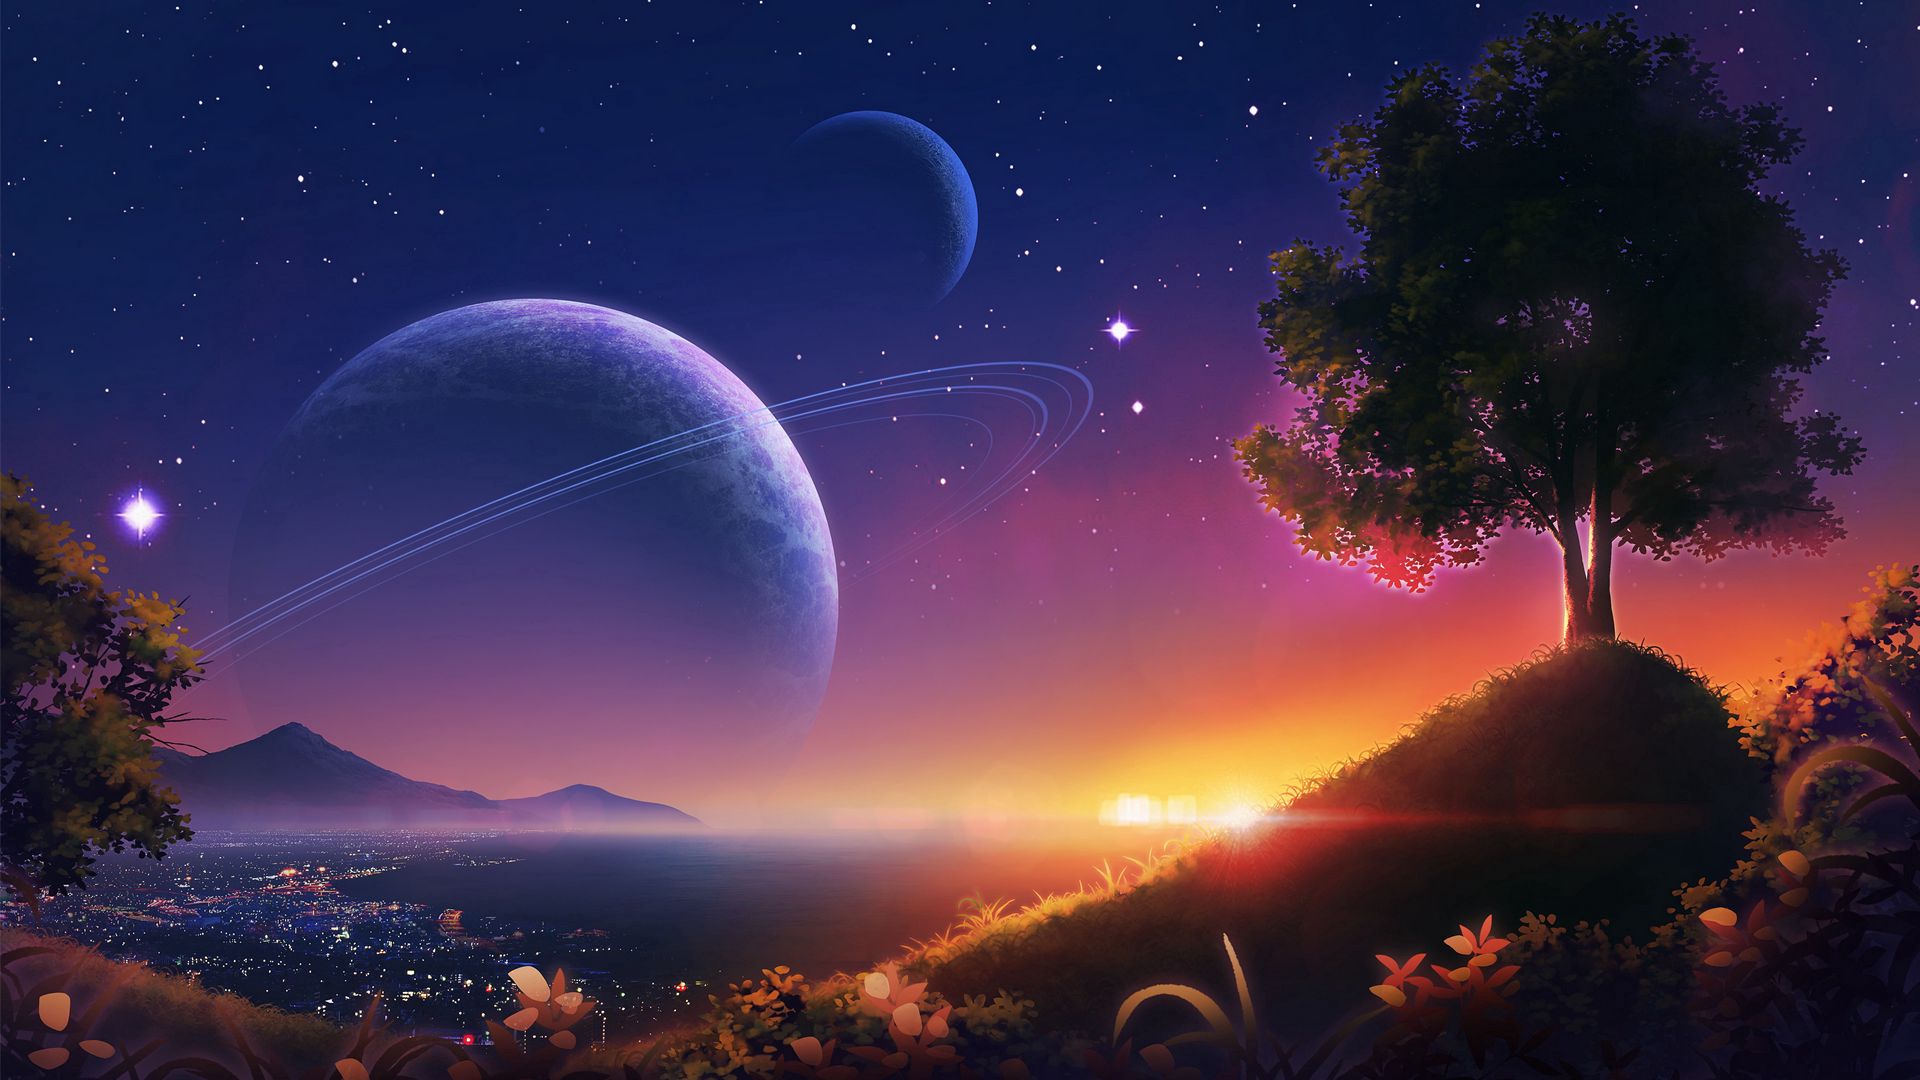 Download wallpaper 1920x1080 landscape, planets, stars, space, art full hd,  hdtv, fhd, 1080p hd background